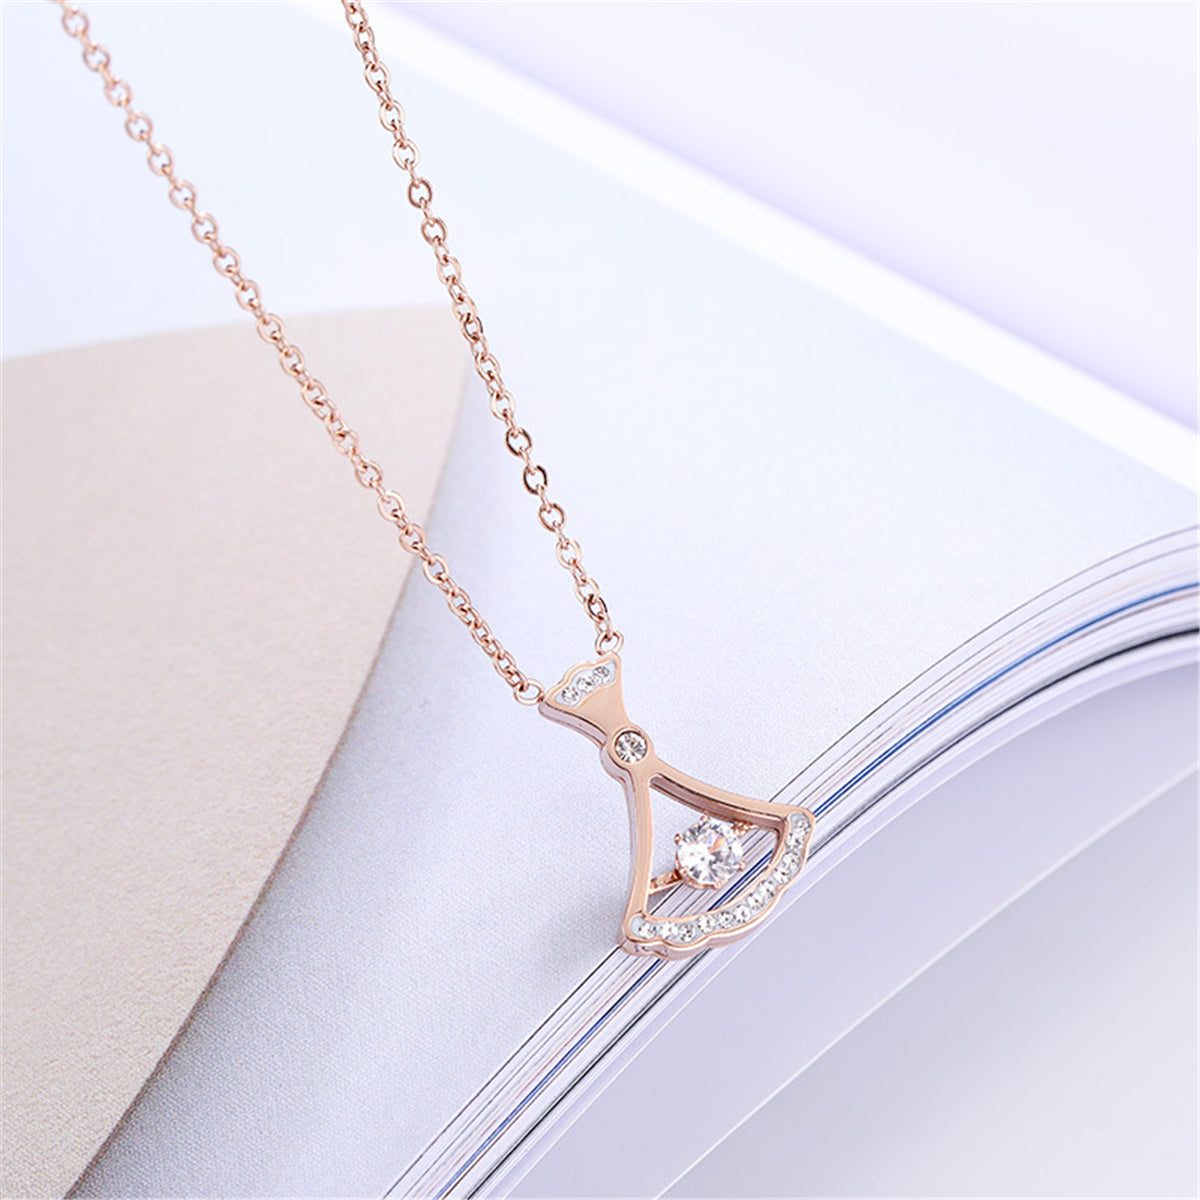 Cubic Zirconia & 18K Rose Gold-Plated Fan Pendant Necklace